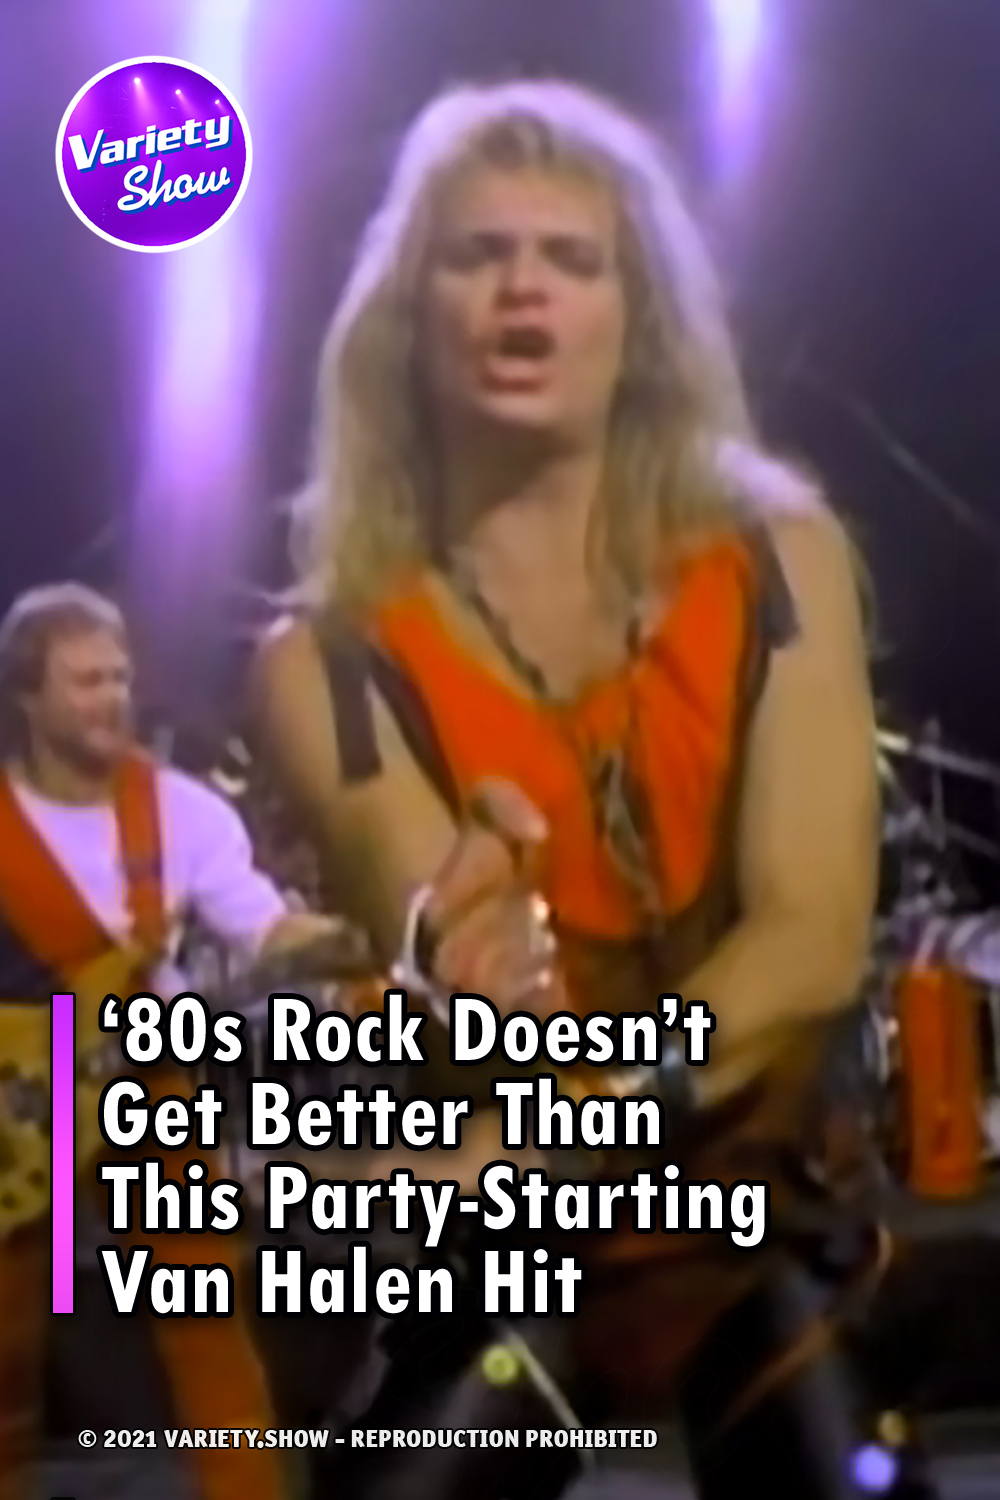 ‘80s Rock Doesn’t Get Better Than This Party-Starting Van Halen Hit